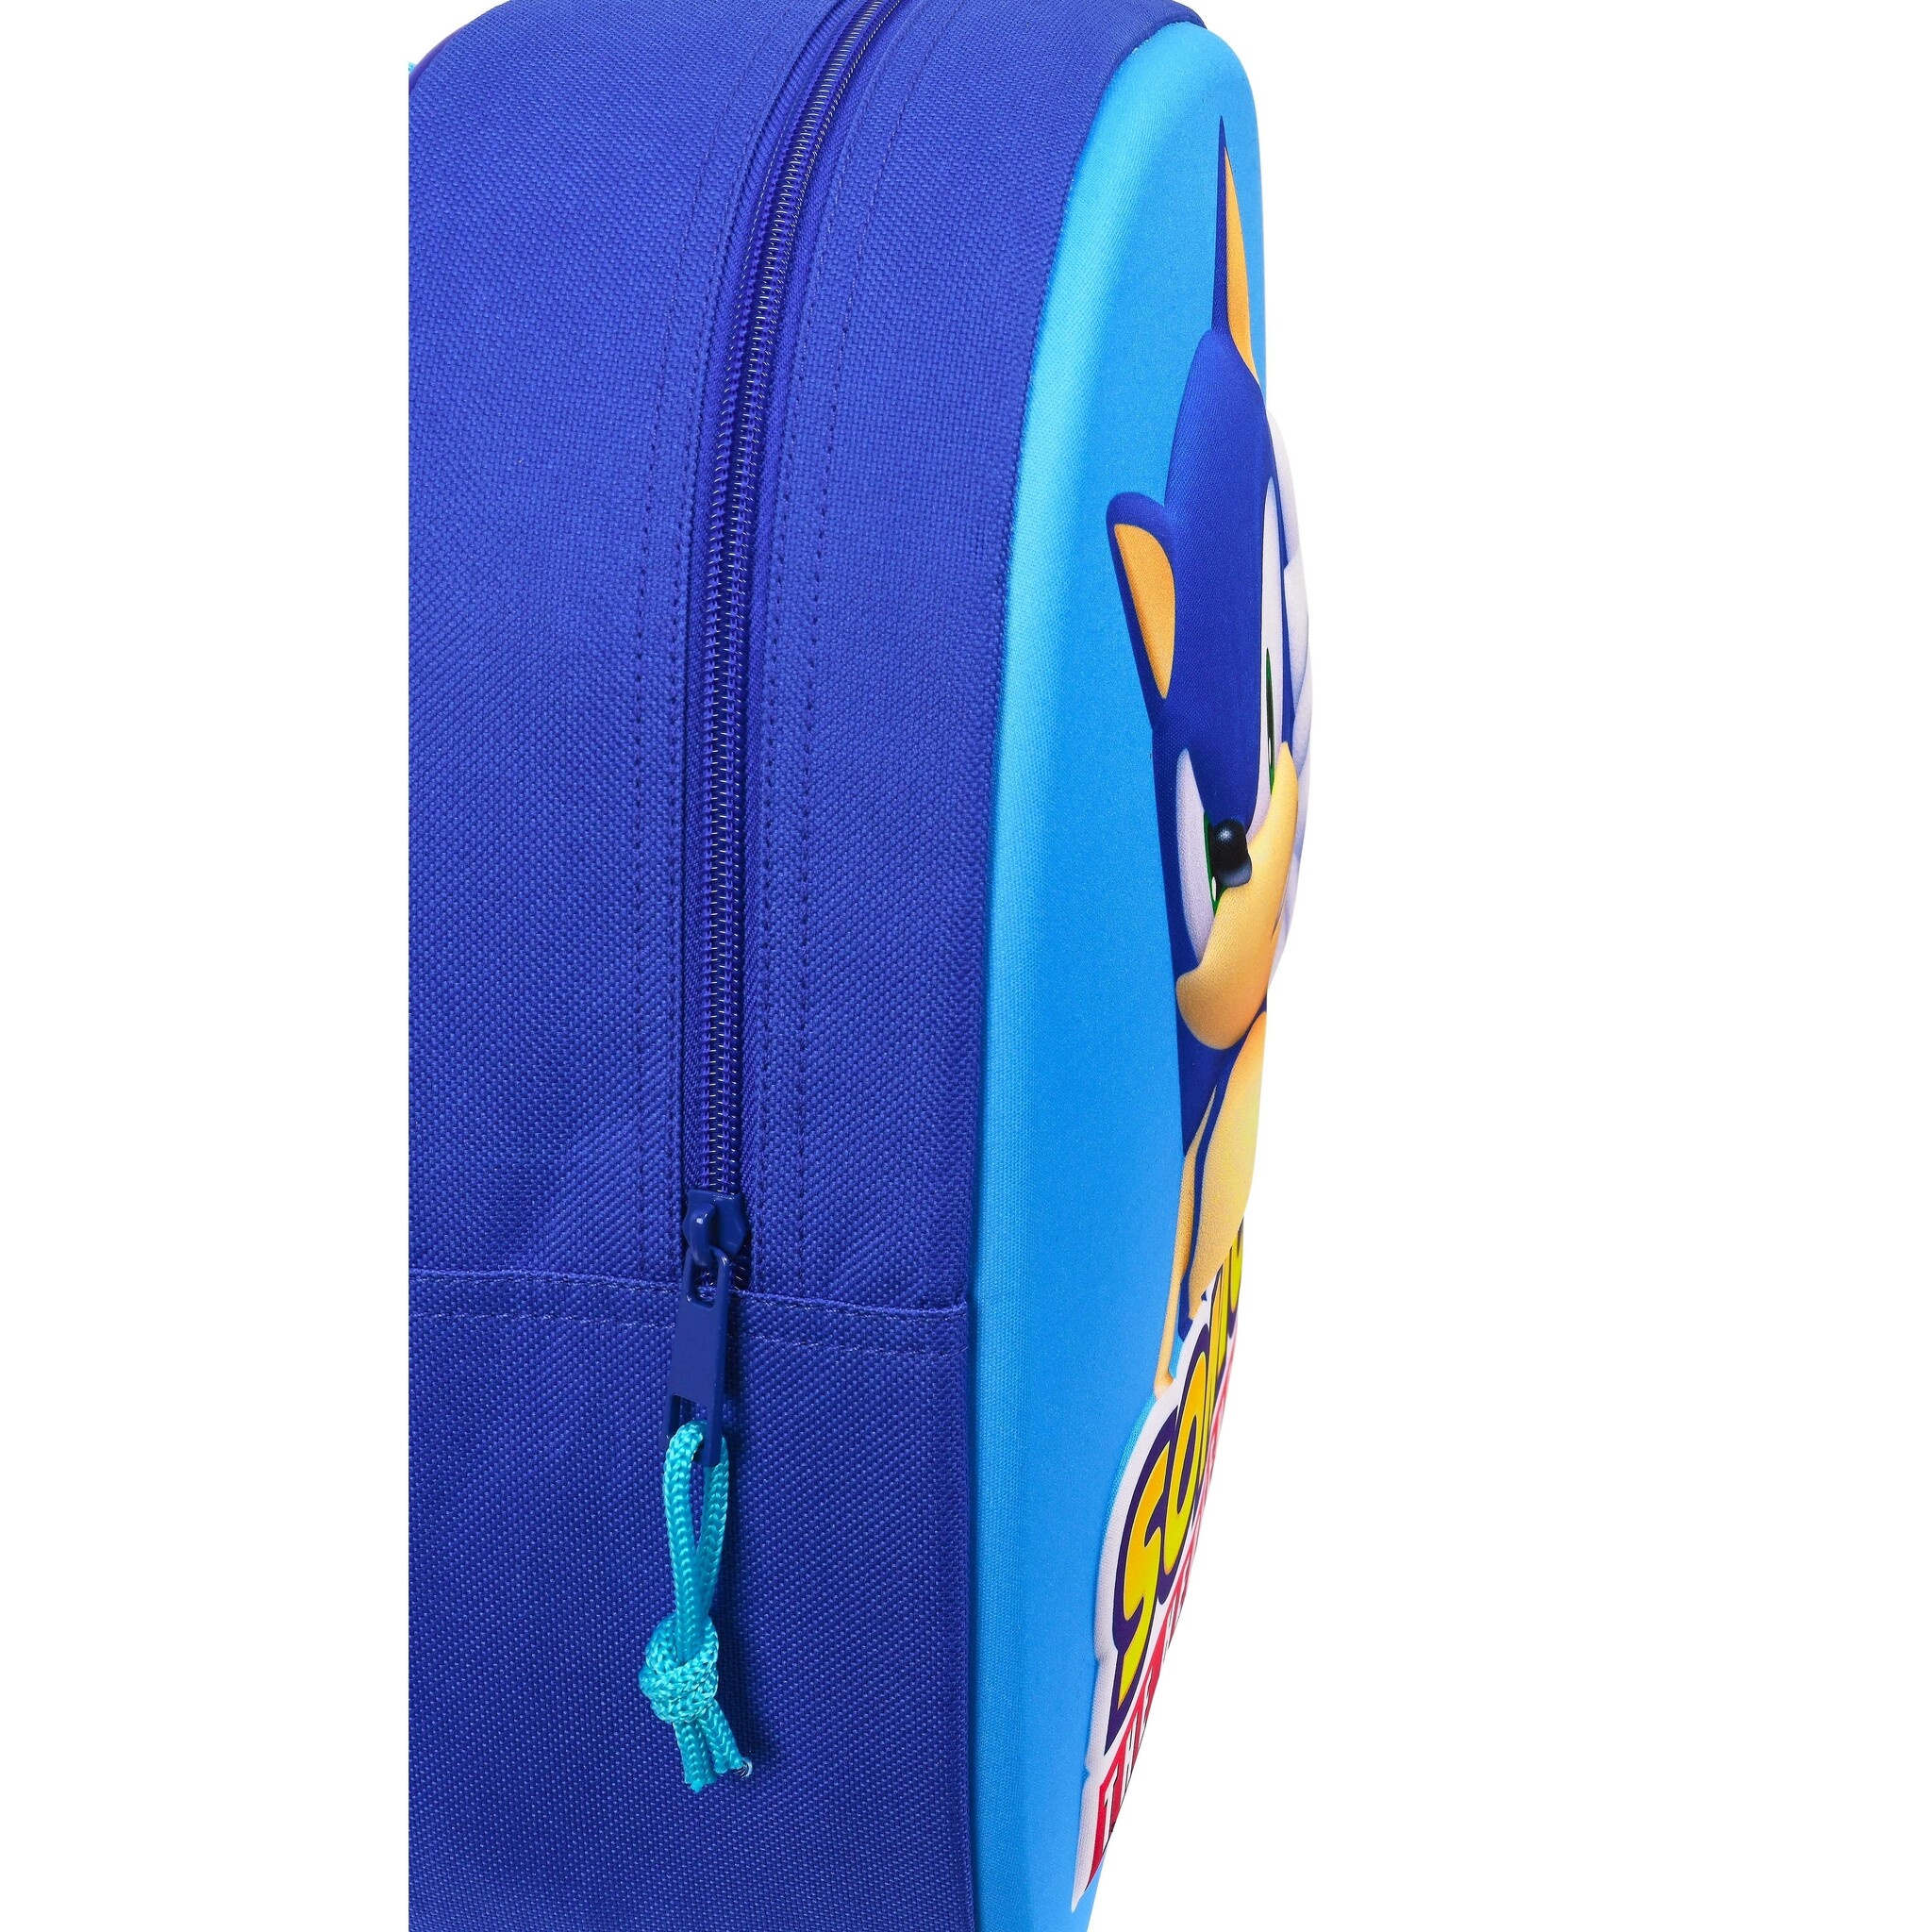 Sonic Rugzak, 3D Great - 33 x 27 x 10 cm - Polyester